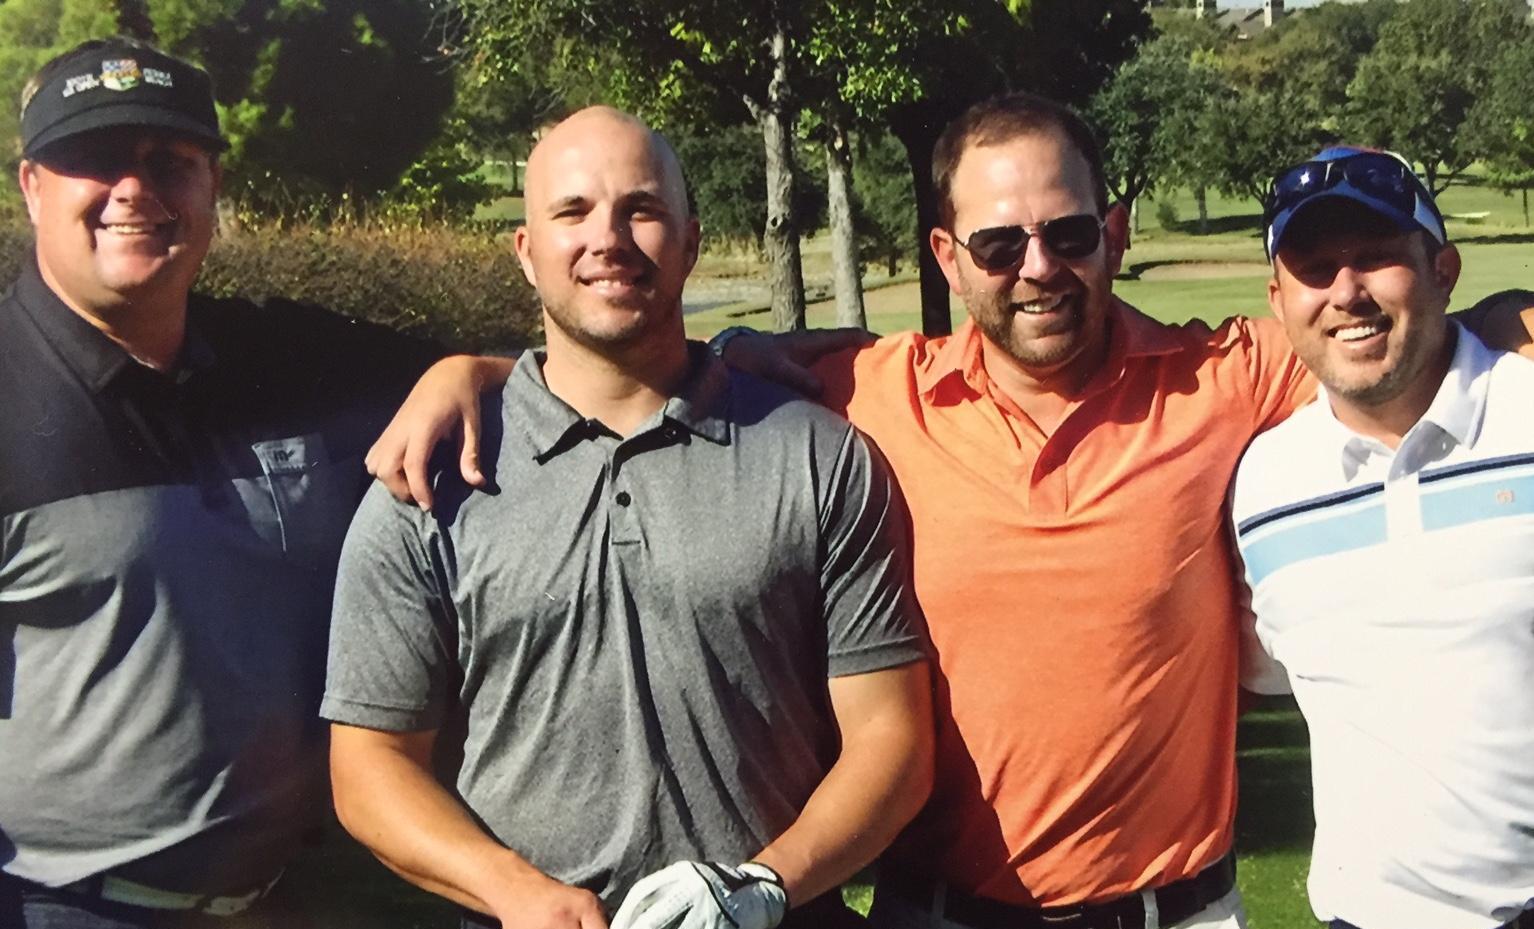 Heath resident, former Boston Red Sox draftee, nabs first hole-in-one